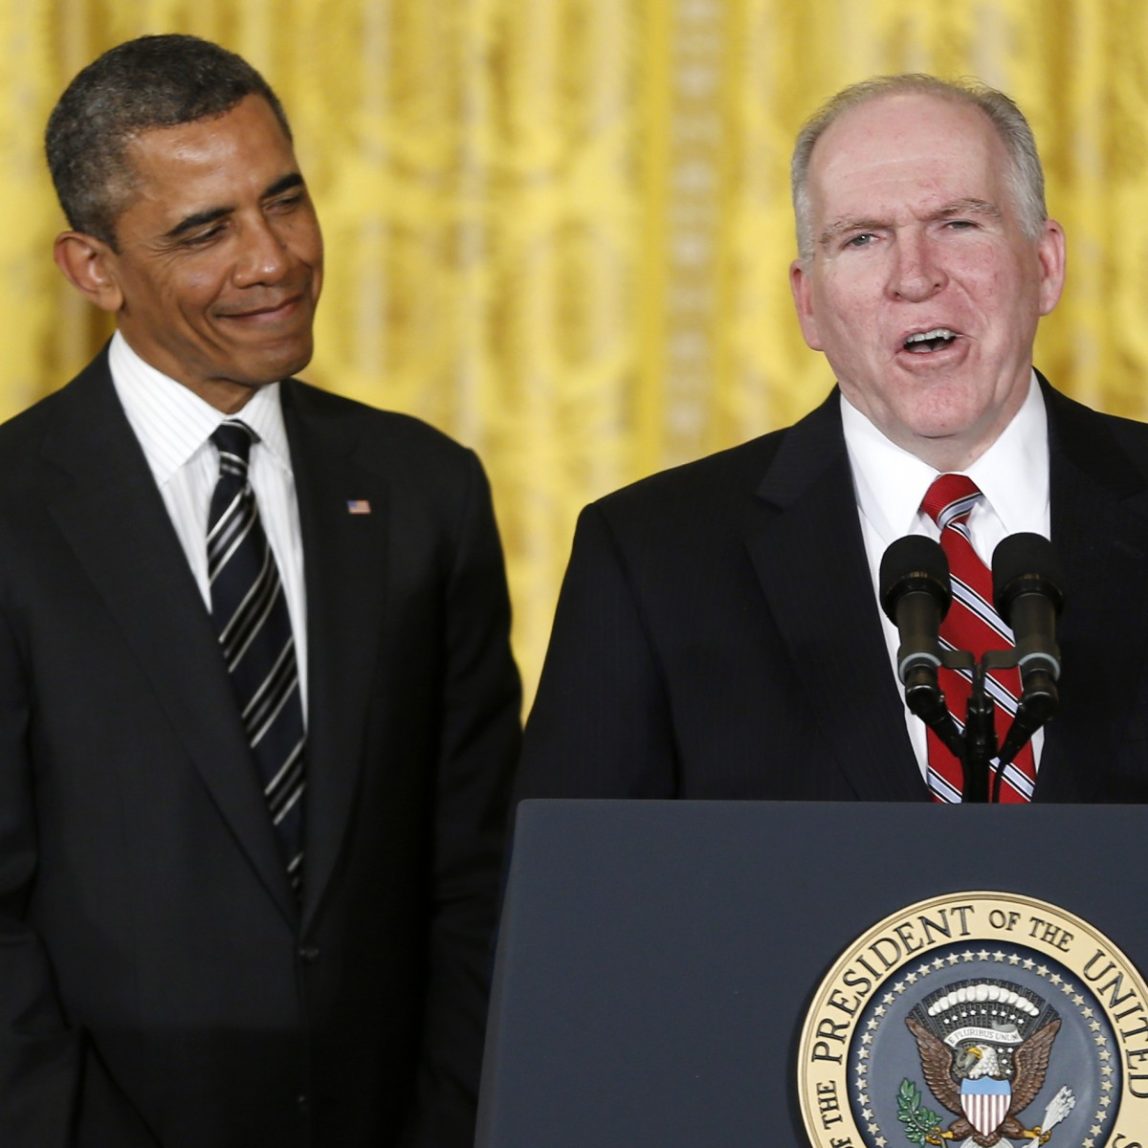 Questions Over CIA Nominee Brennan’s Denial Of Civilian Drone Deaths